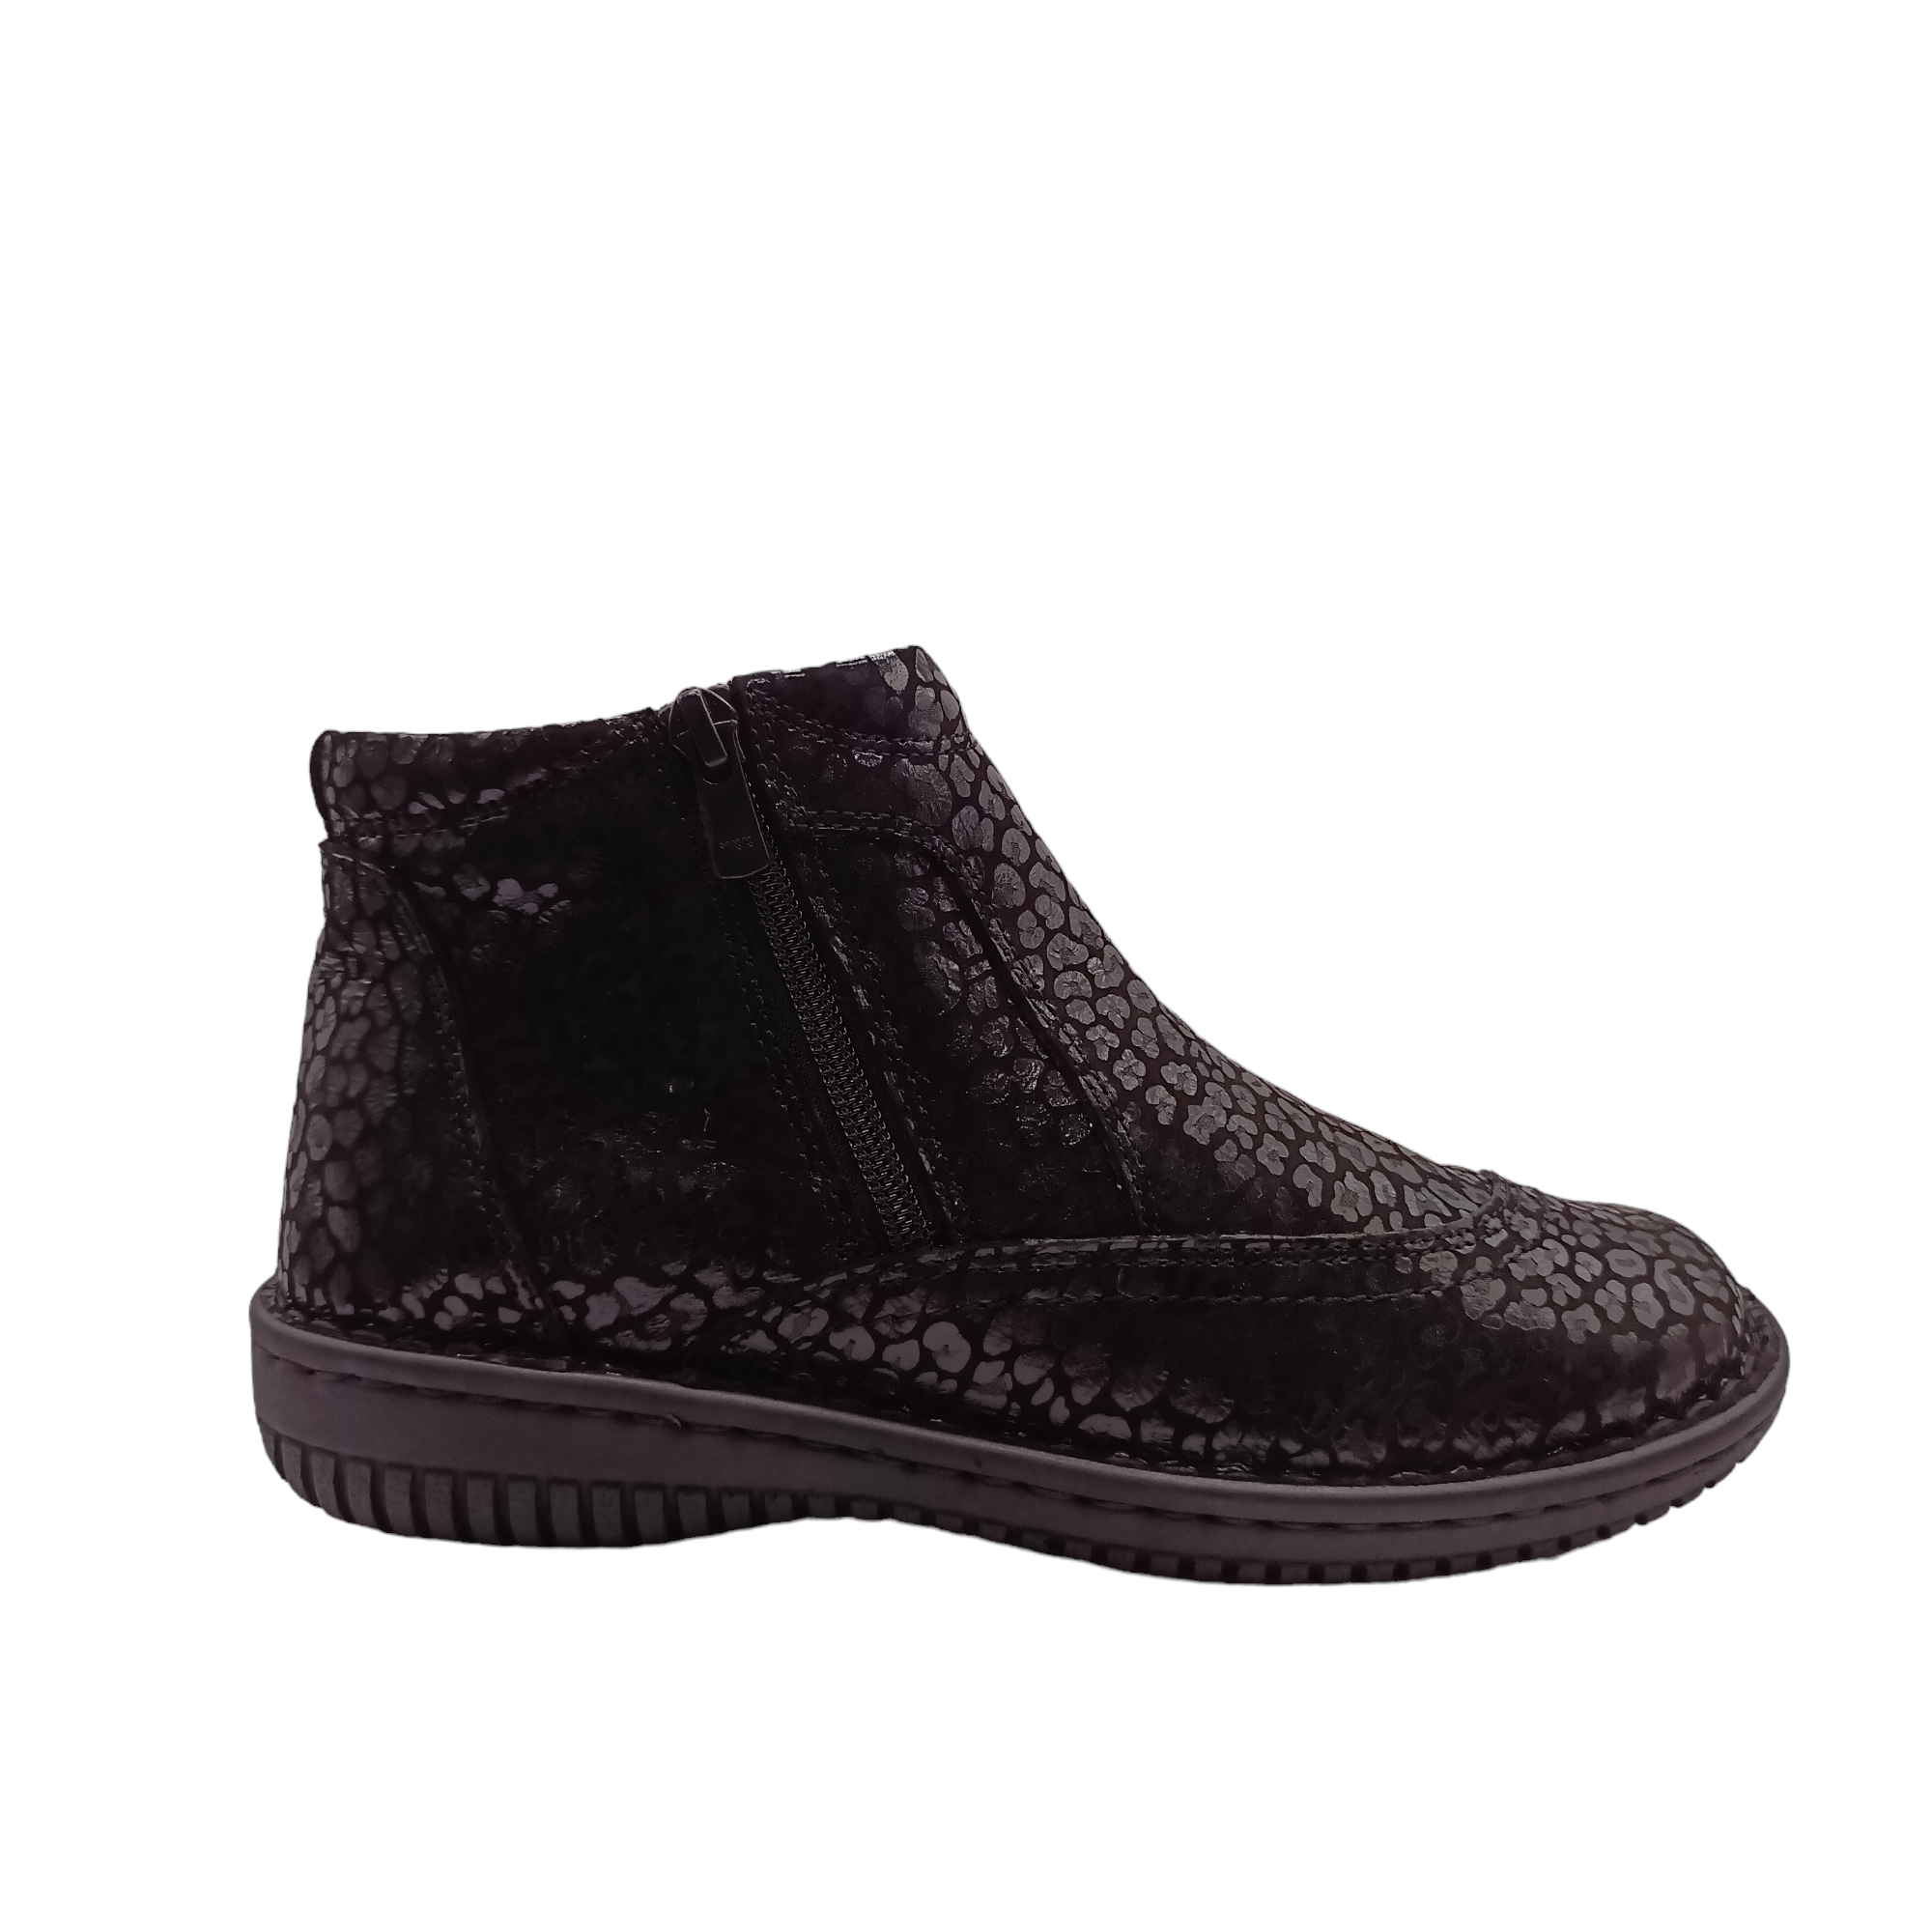 Shop CP522-32 Cabello - with shoe&me - from Cabello - Boots - Boot, Winter, Womens - [collection]